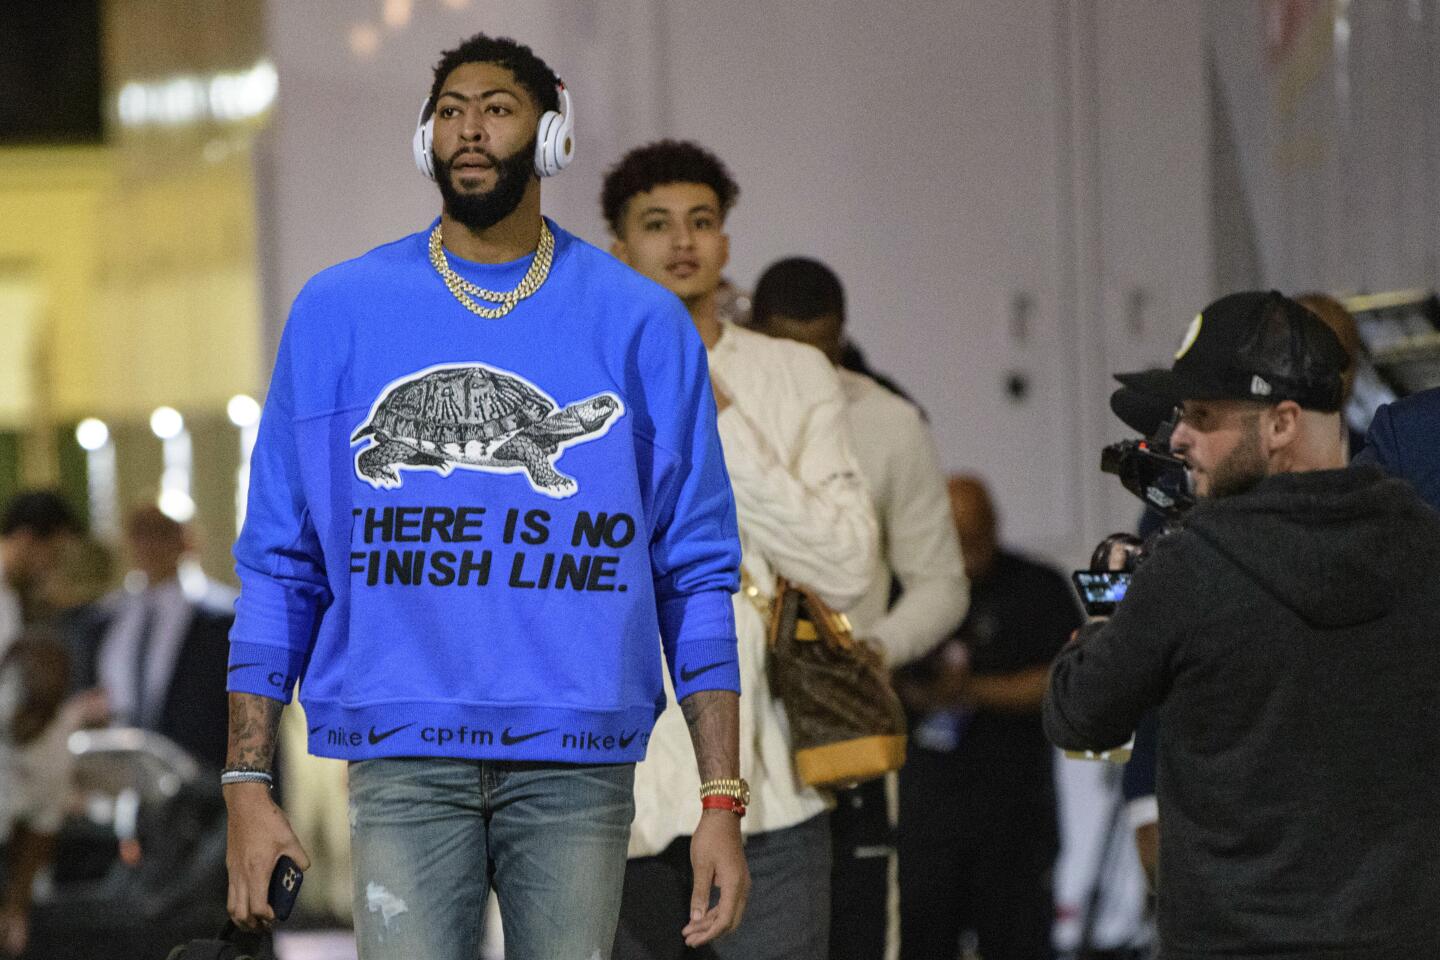 Lakers forward Anthony Davis arrives for the a game against the Pelicans on Nov. 27 at Smoothie King Center.